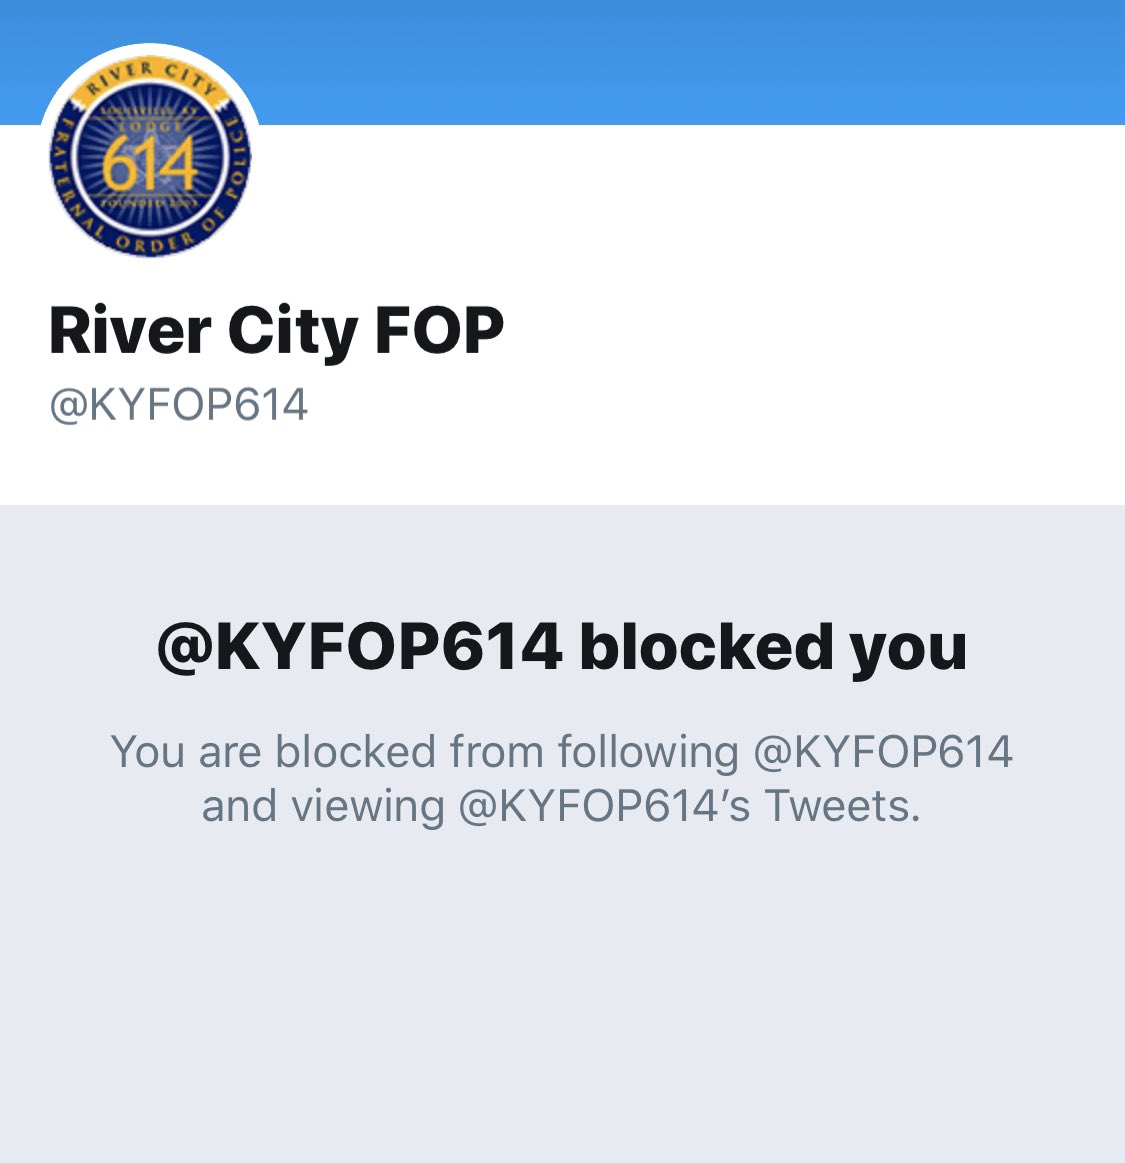 Because of course they did Y'all think  @KYFOP614 knows I can still talk about them and encourage others to do the same even when I'm blocked? 